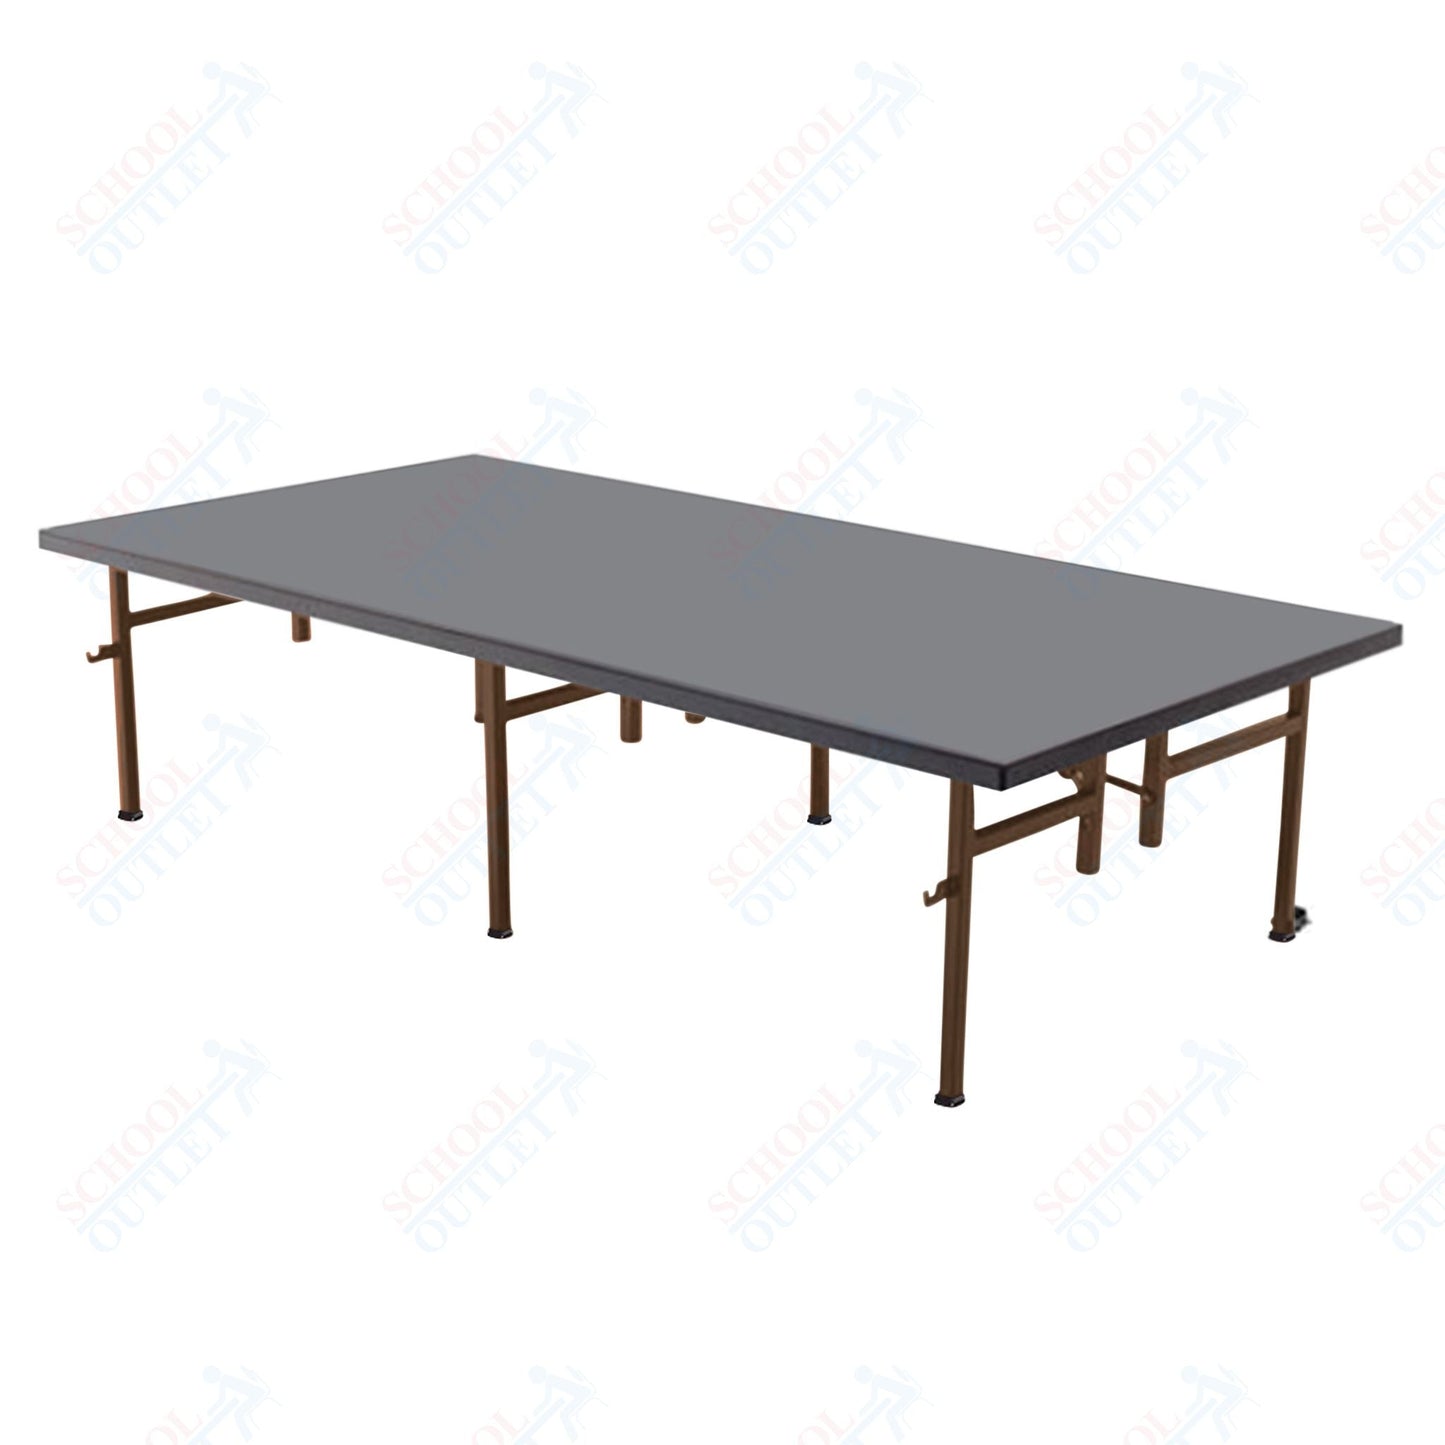 AmTab Fixed Height Stage - Polypropylene Top - 36"W x 72"L x 16"H (AmTab AMT - ST3616P) - SchoolOutlet